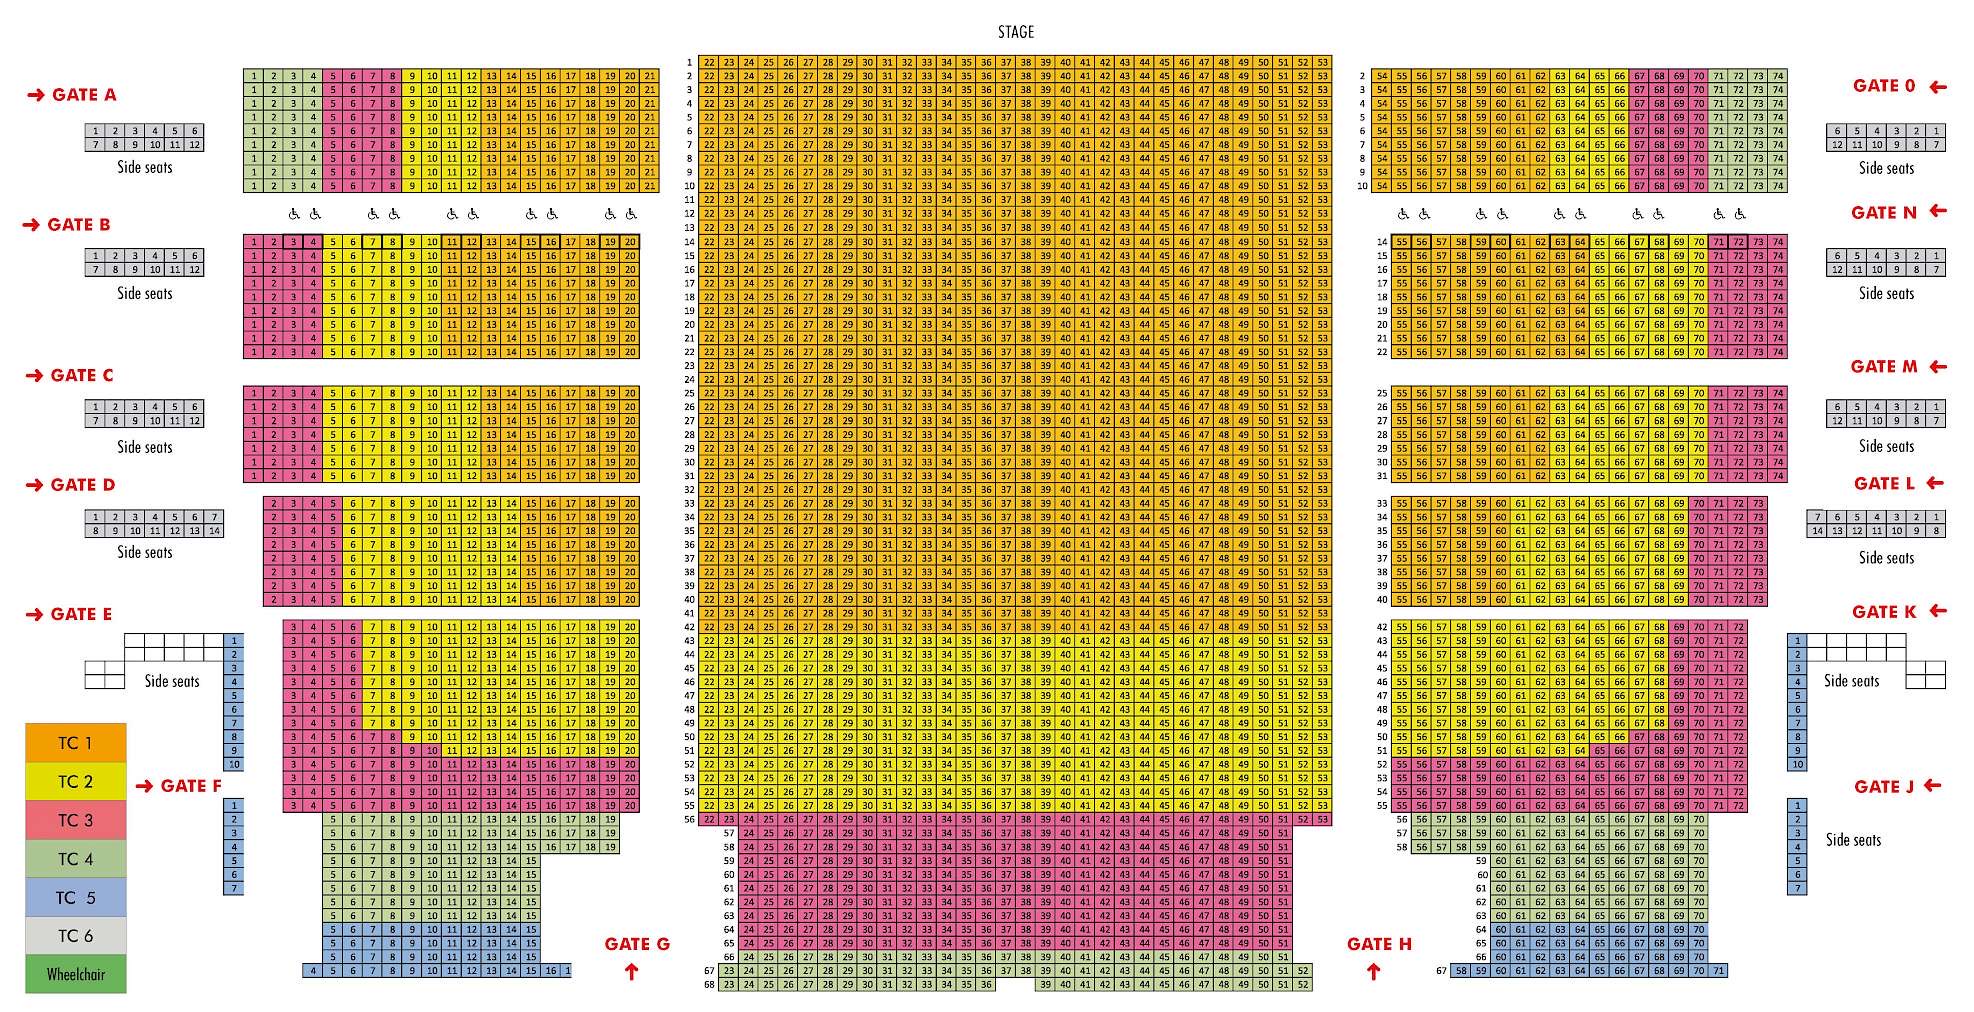 Oberammergau Passion Play Seating Chart